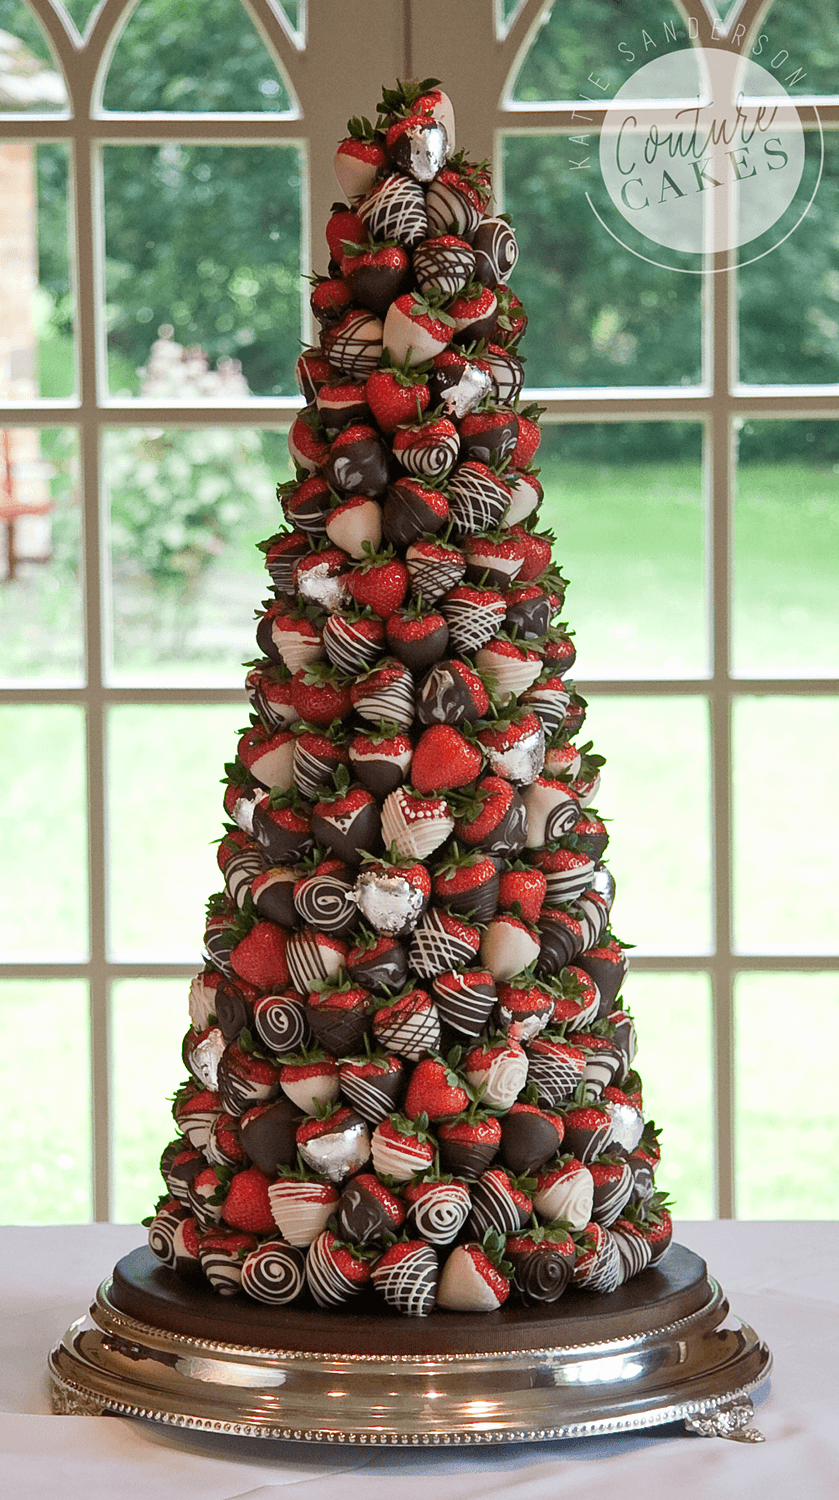 Provides 200 dipped strawberries, Price £495 